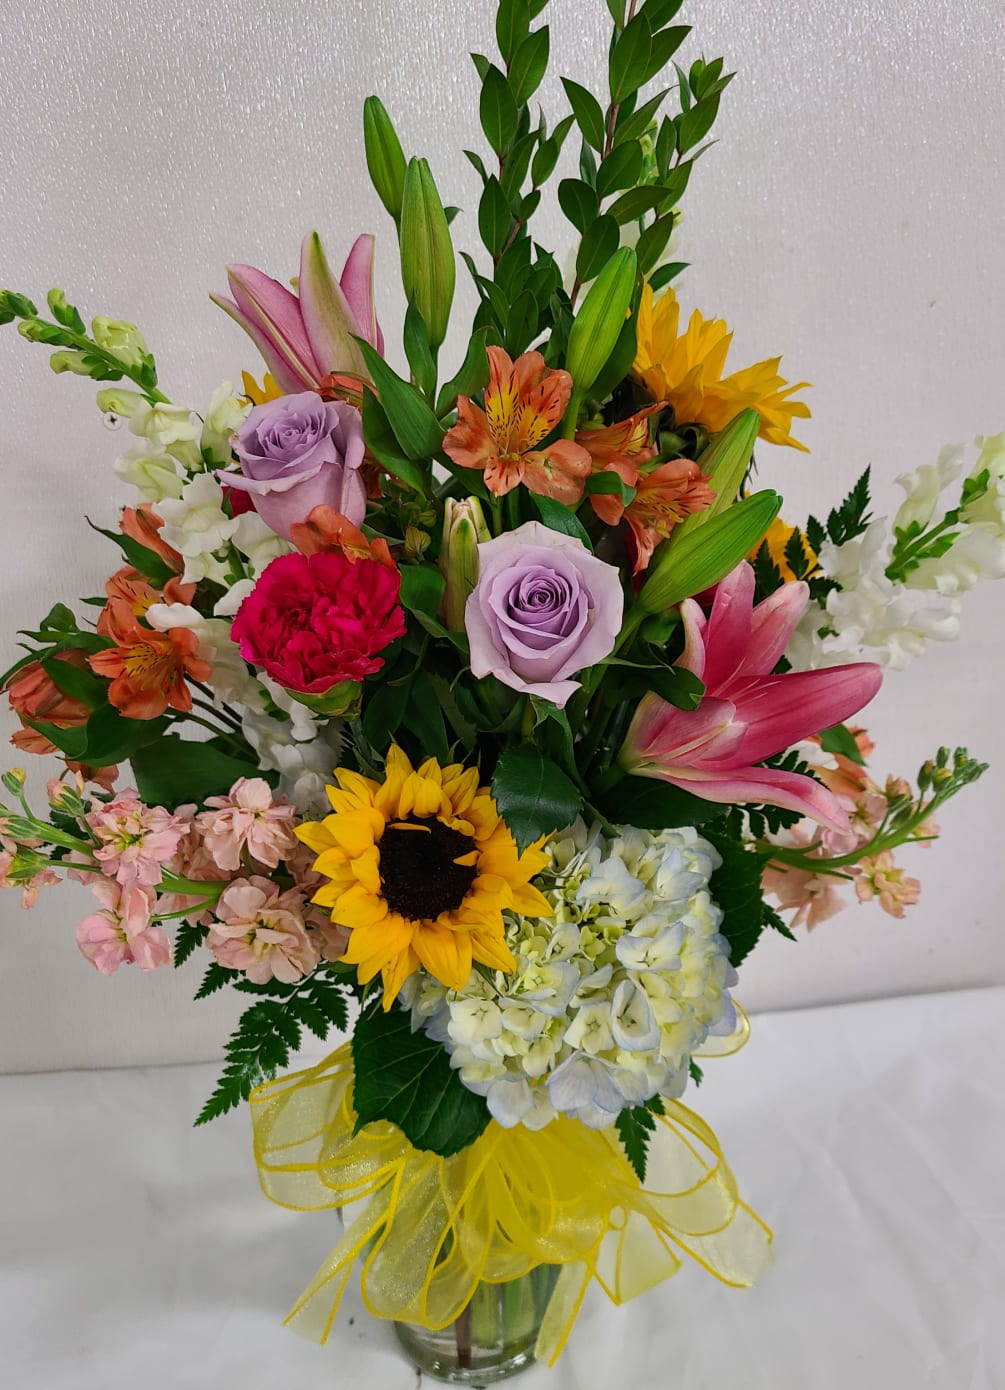 Large vased arrangement with a variety of seasonal flowers and colors